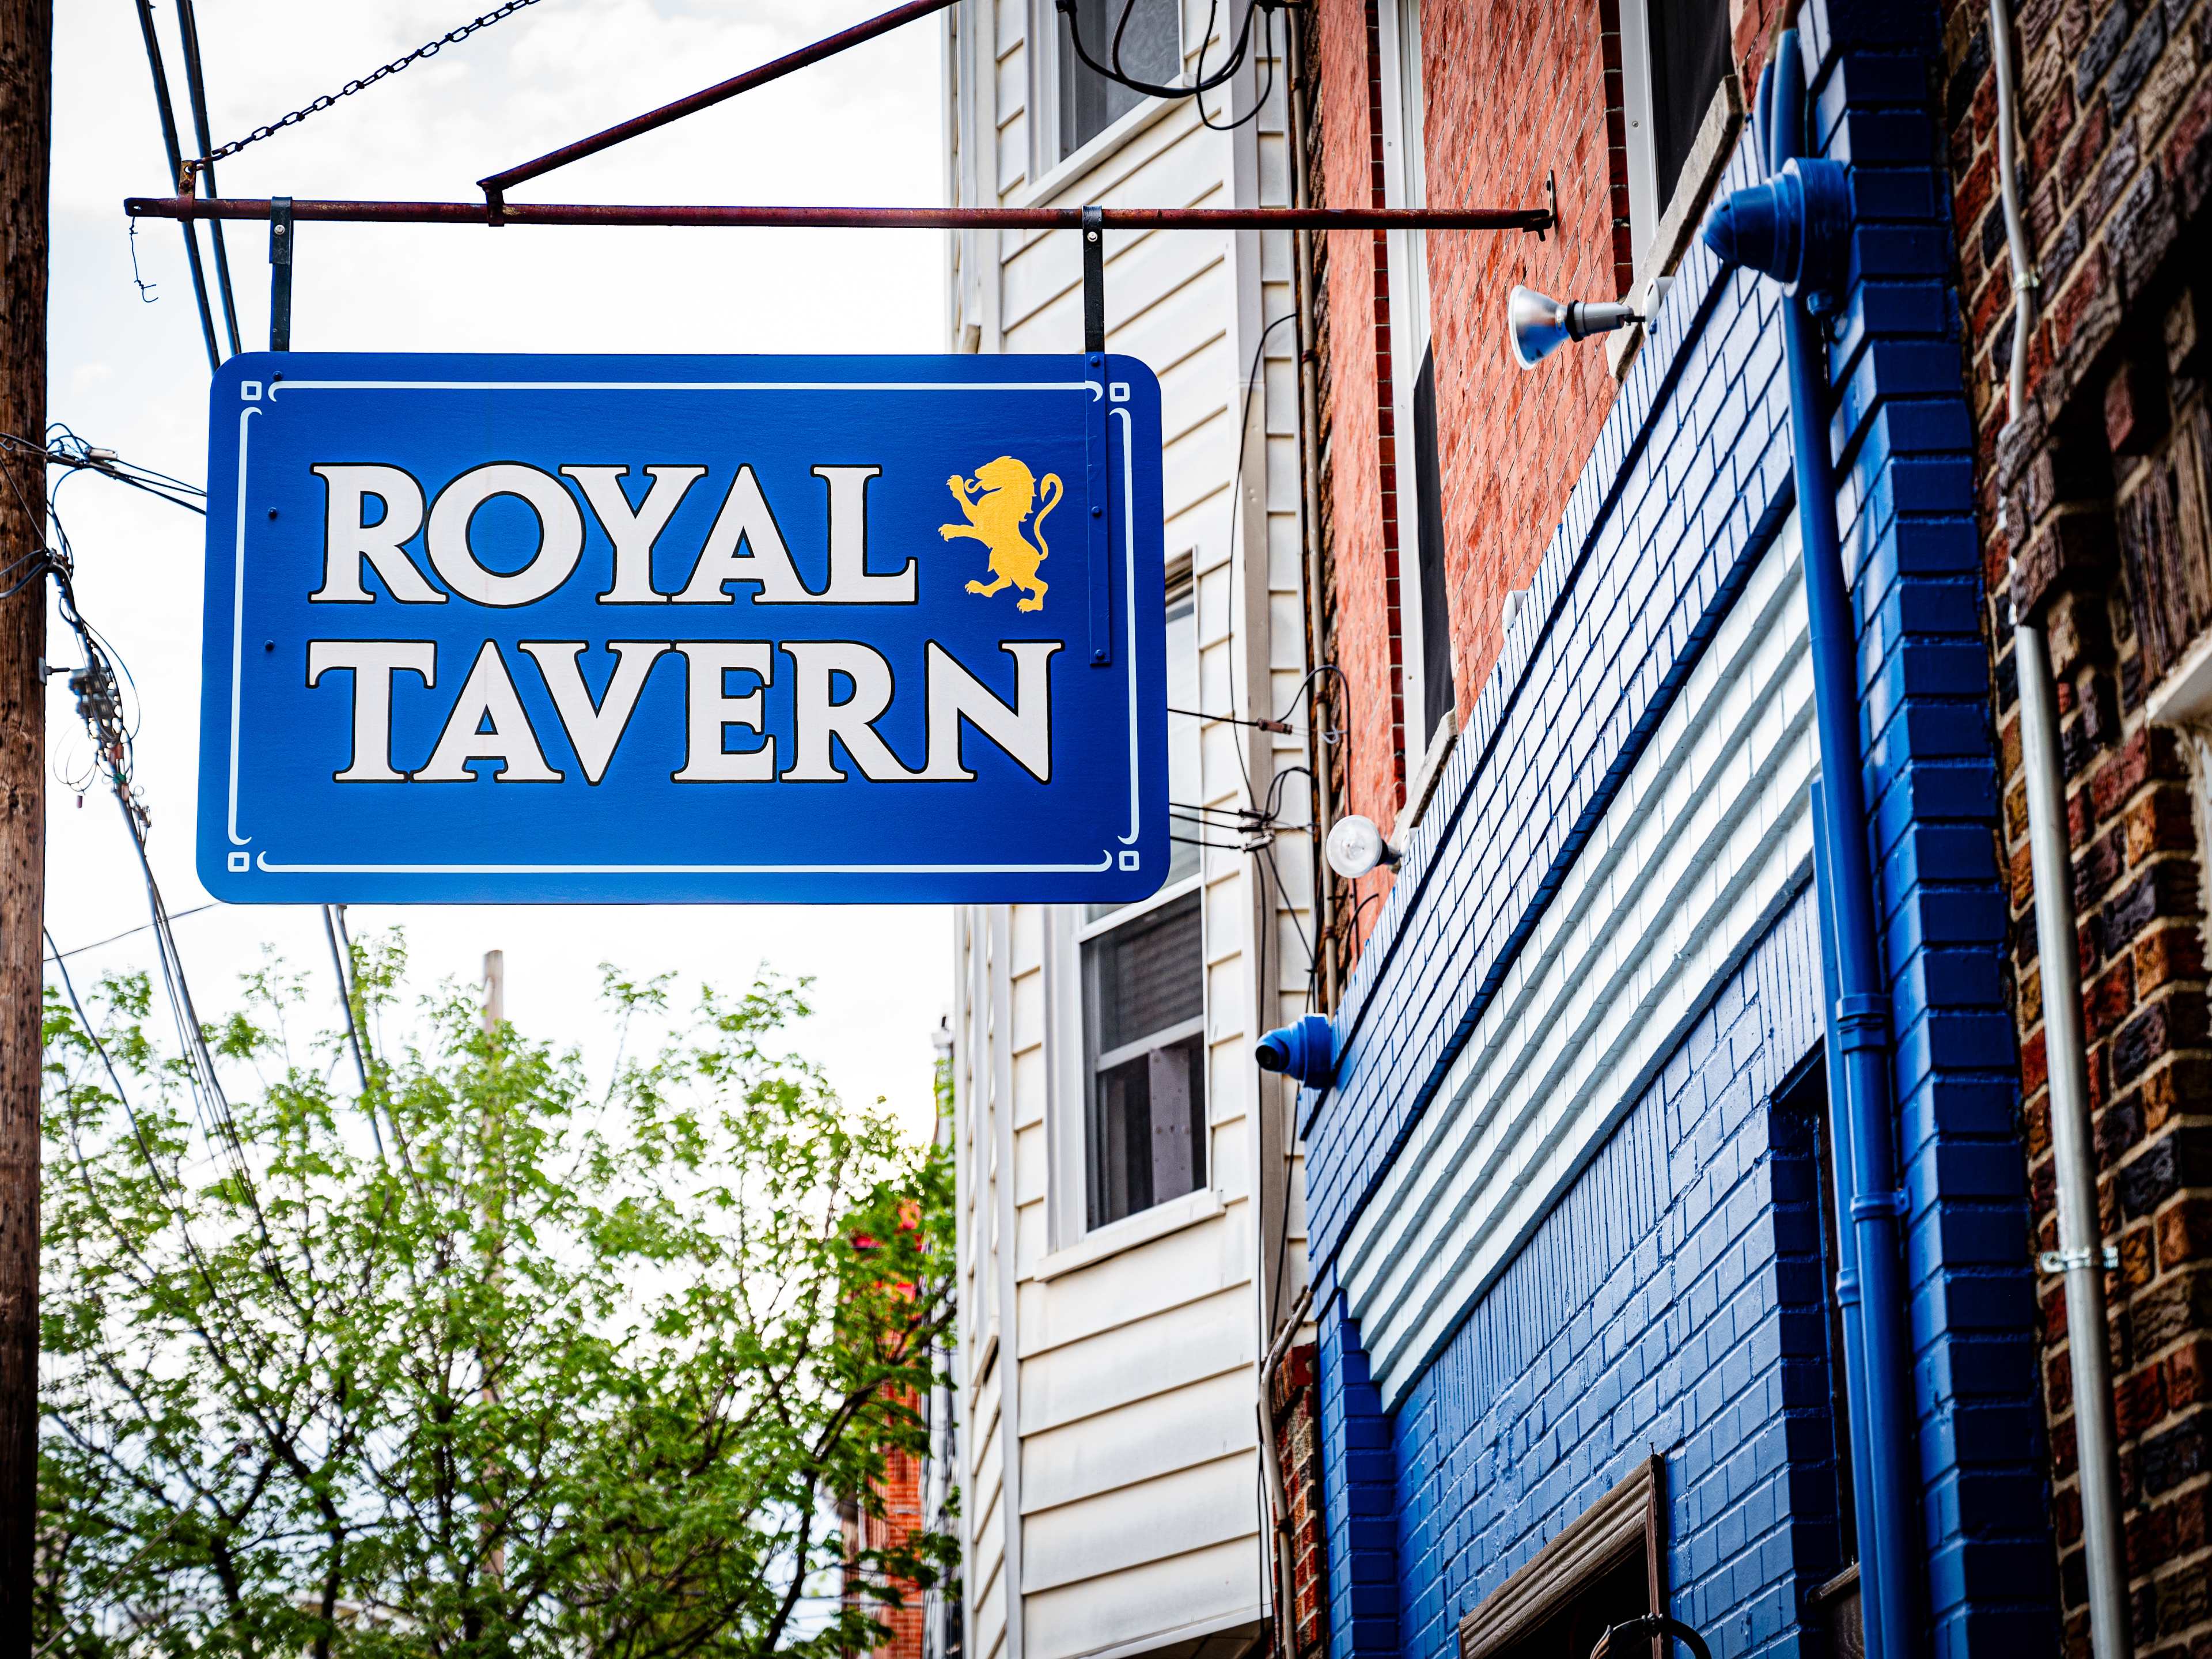 This is the exterior of Royal Tavern.